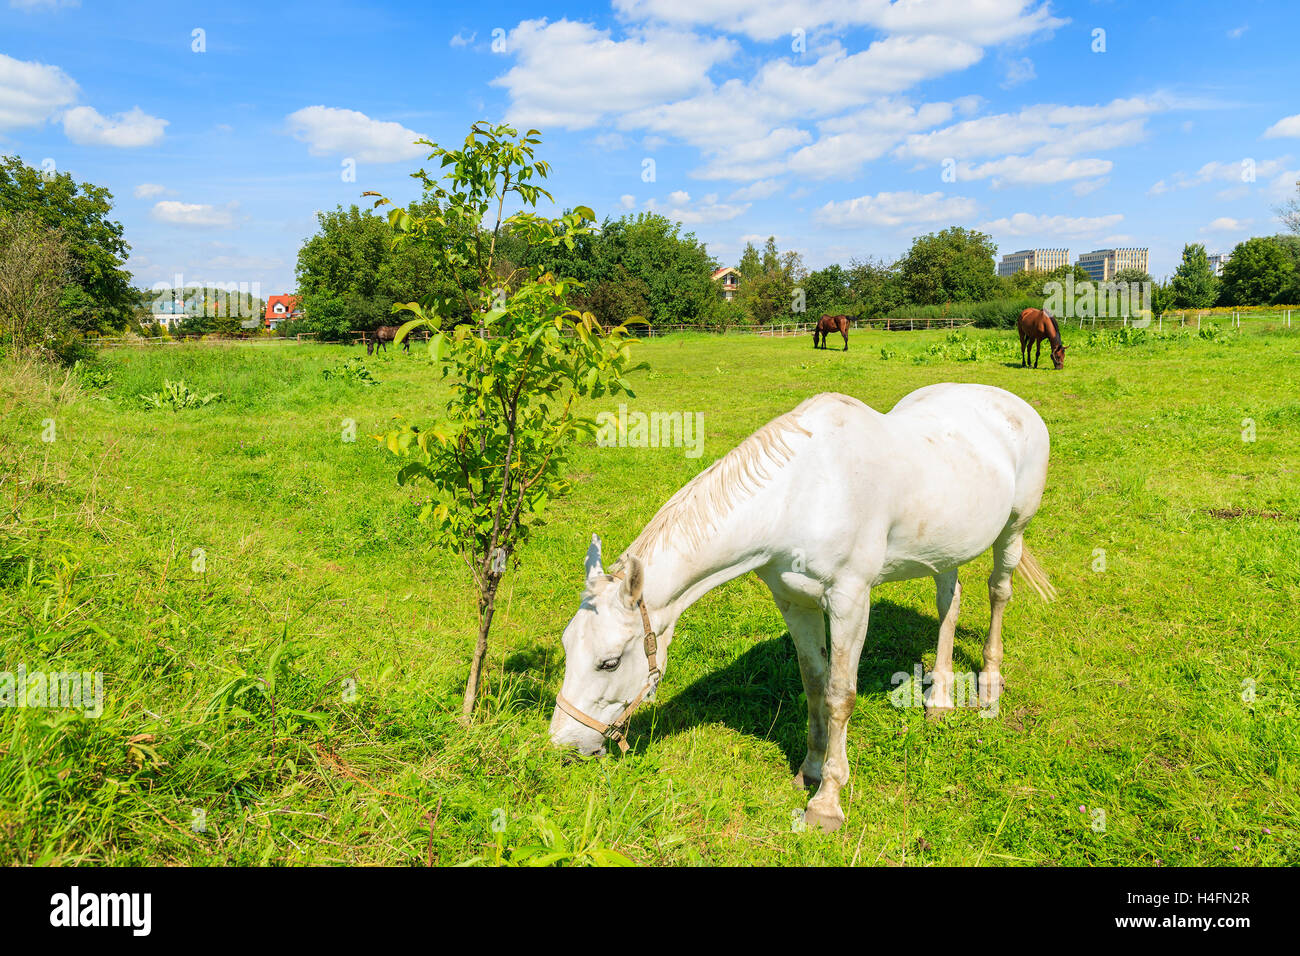 White horse grazing on green pasture in rural area of Krakow city, Poland Stock Photo